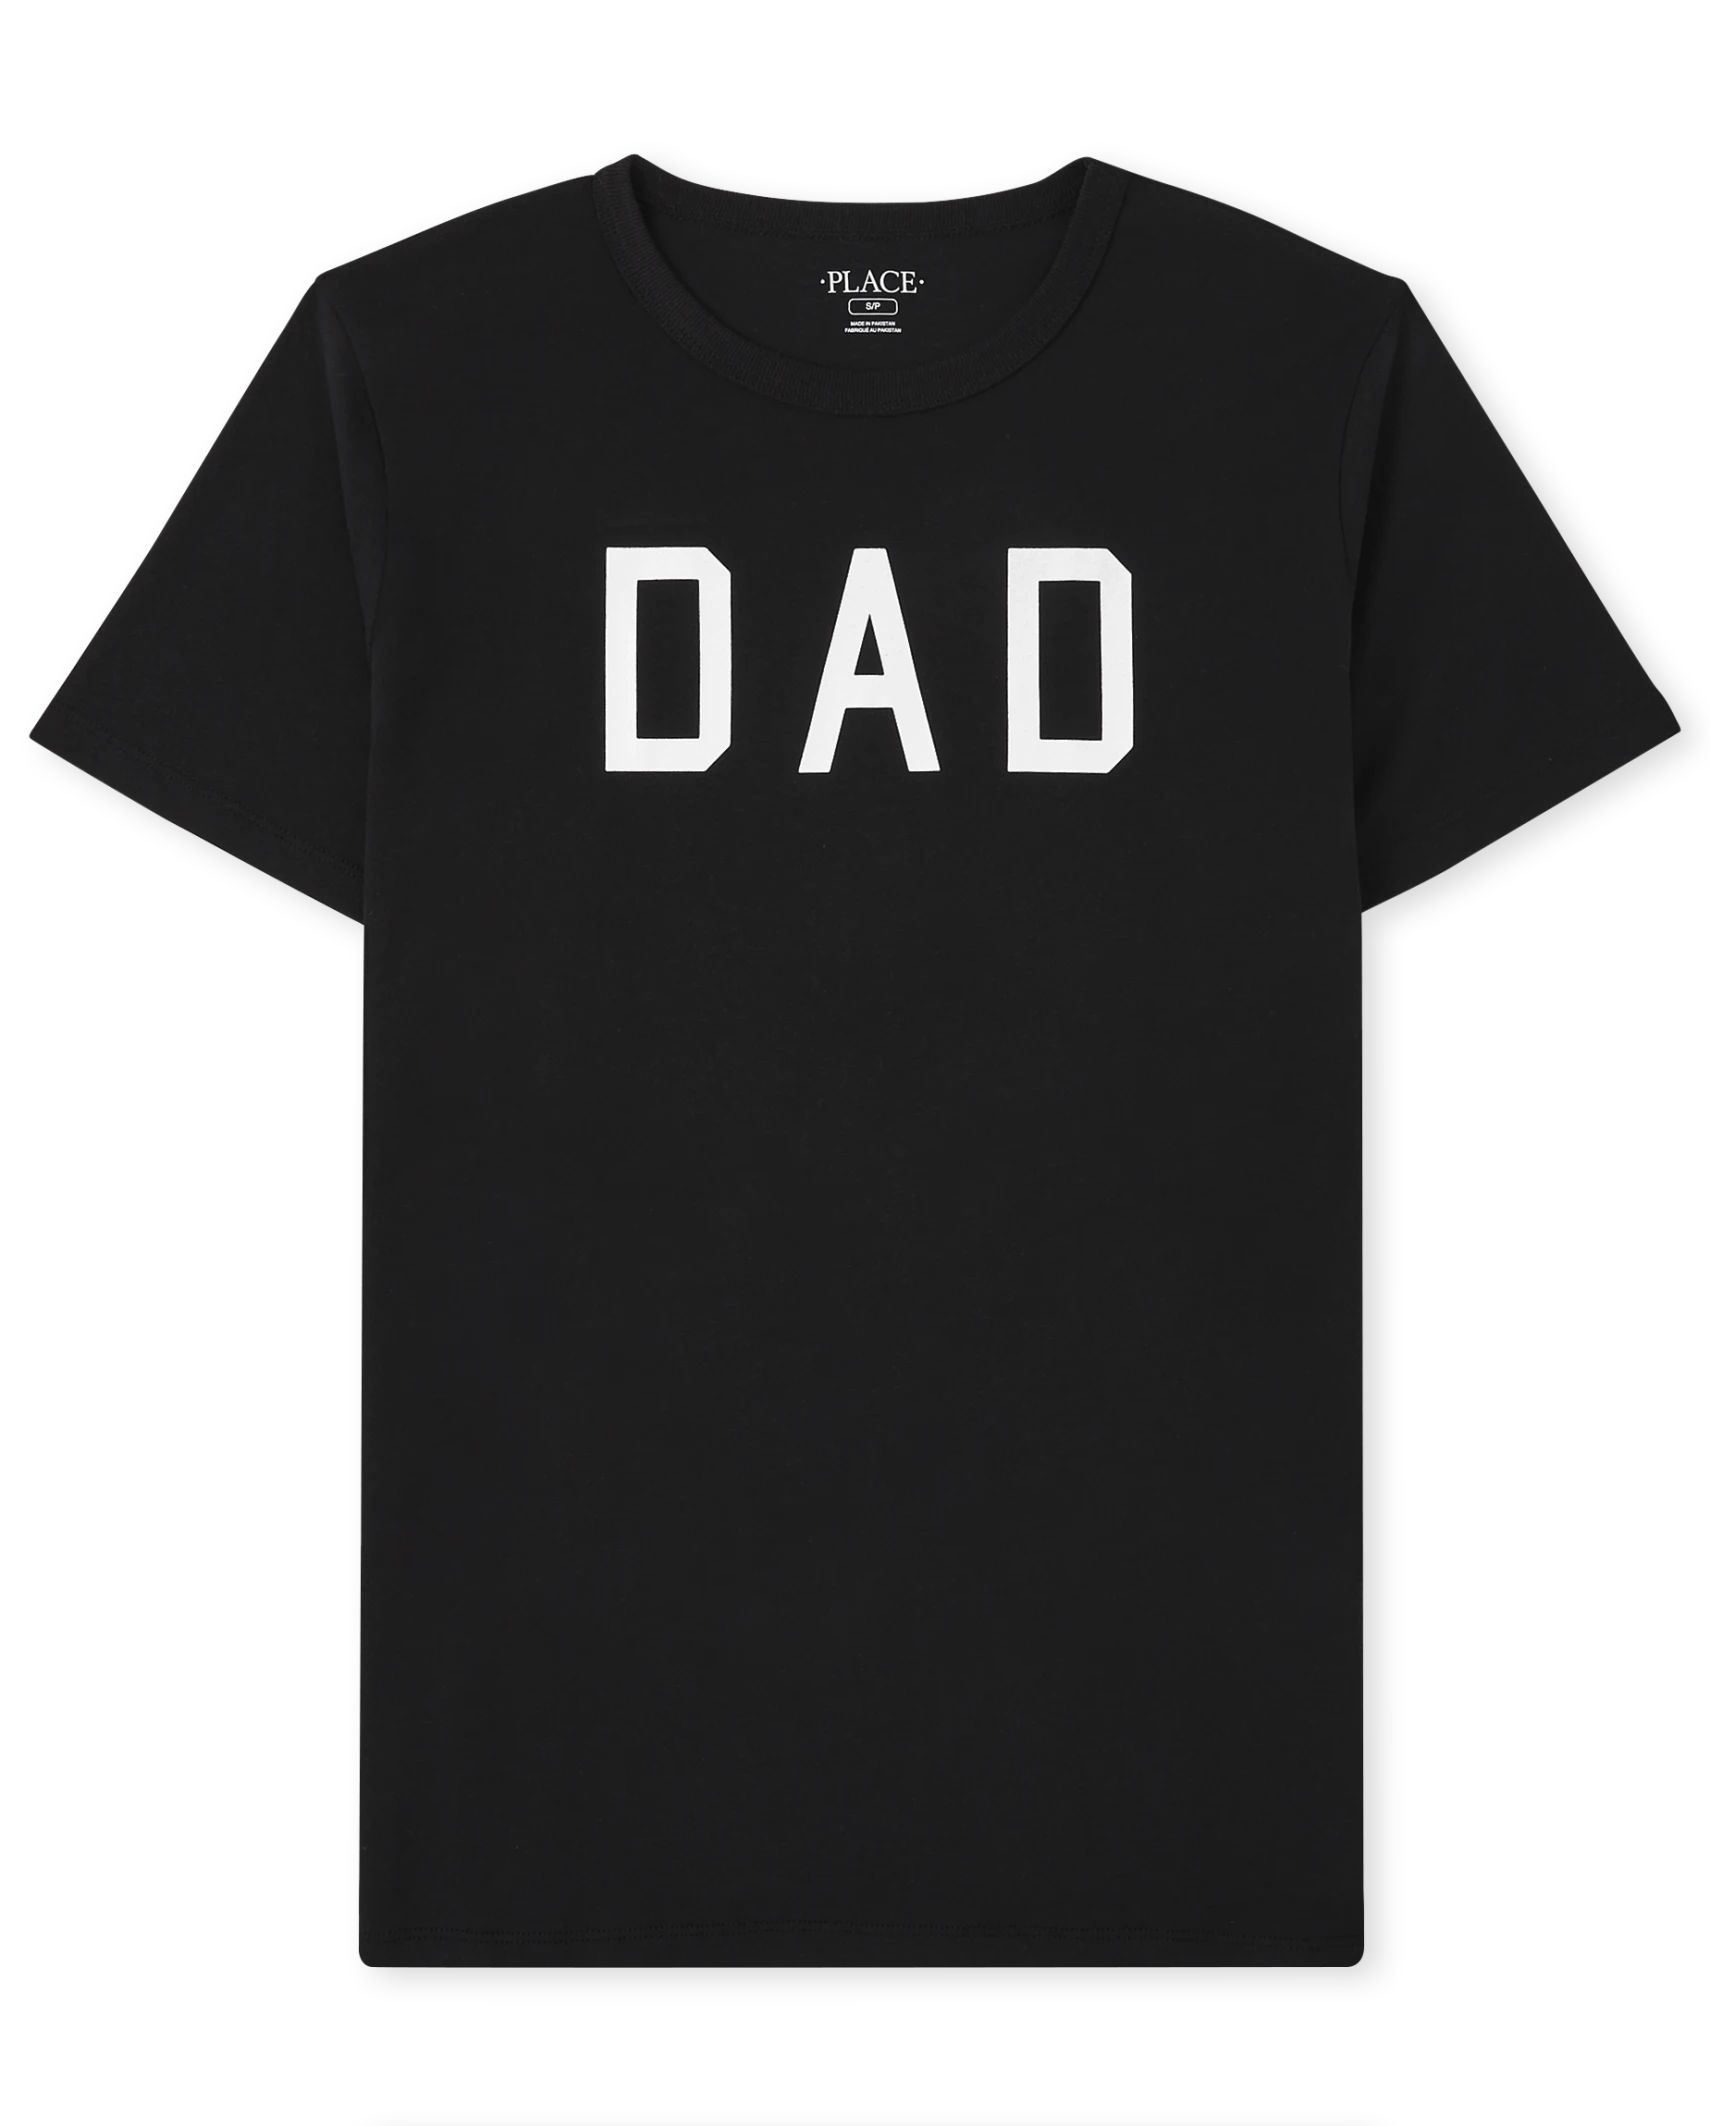 Mens Matching Family Dad Graphic Tee - black | The Children's Place